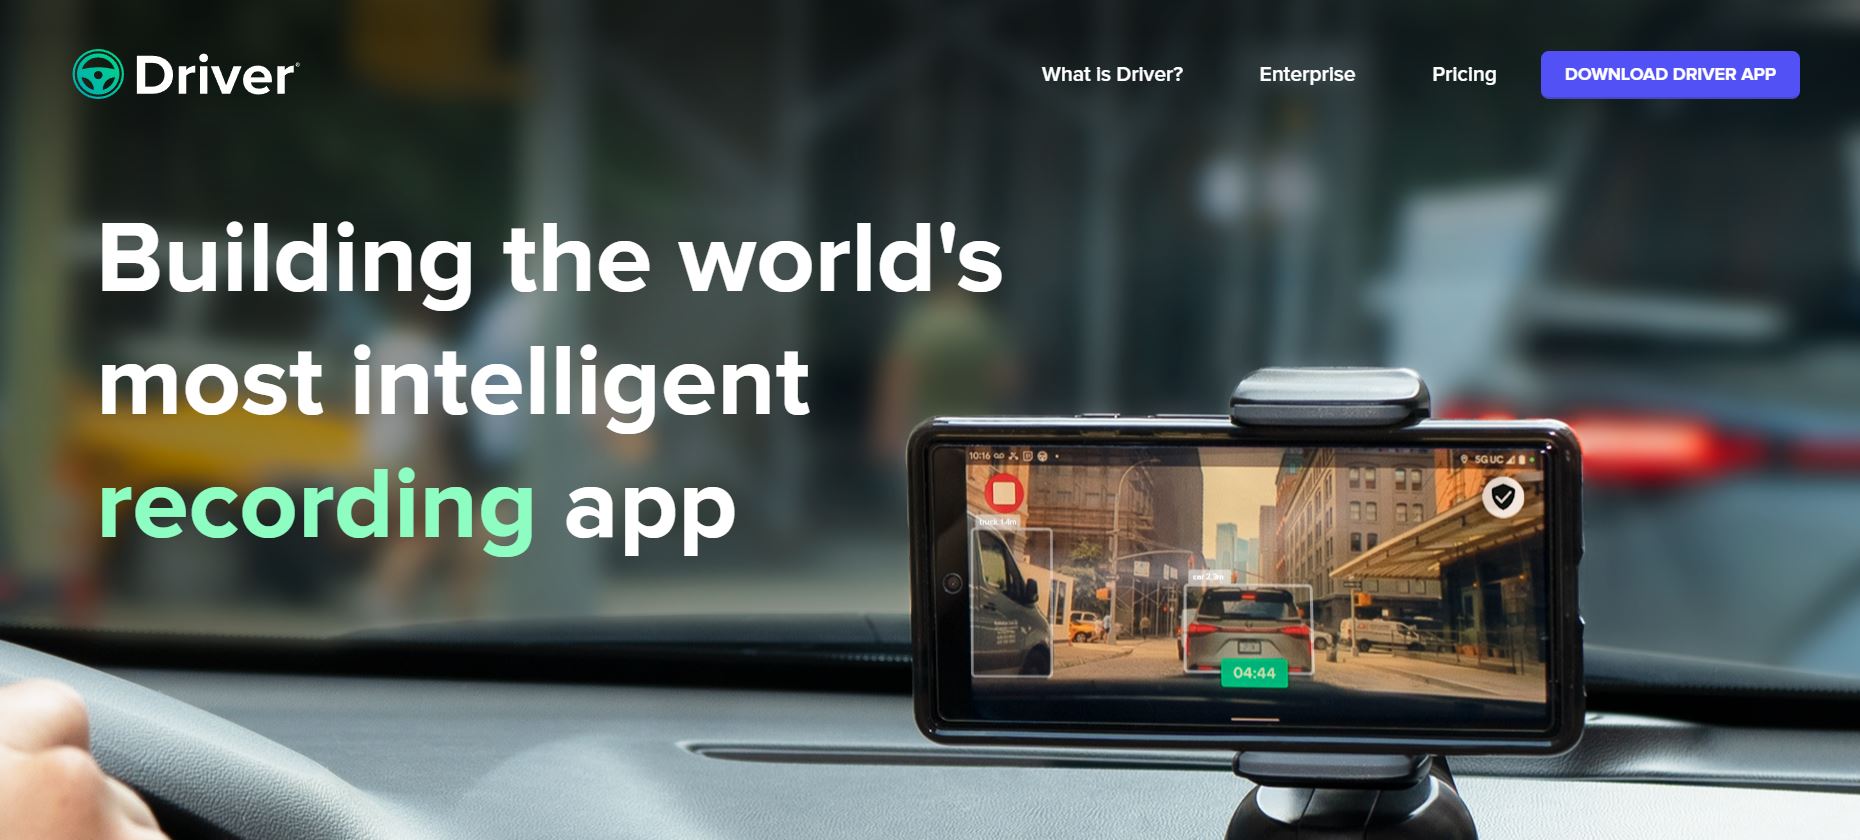 With a remarkable $6 million in funding, DRIVER is shaking up the industry